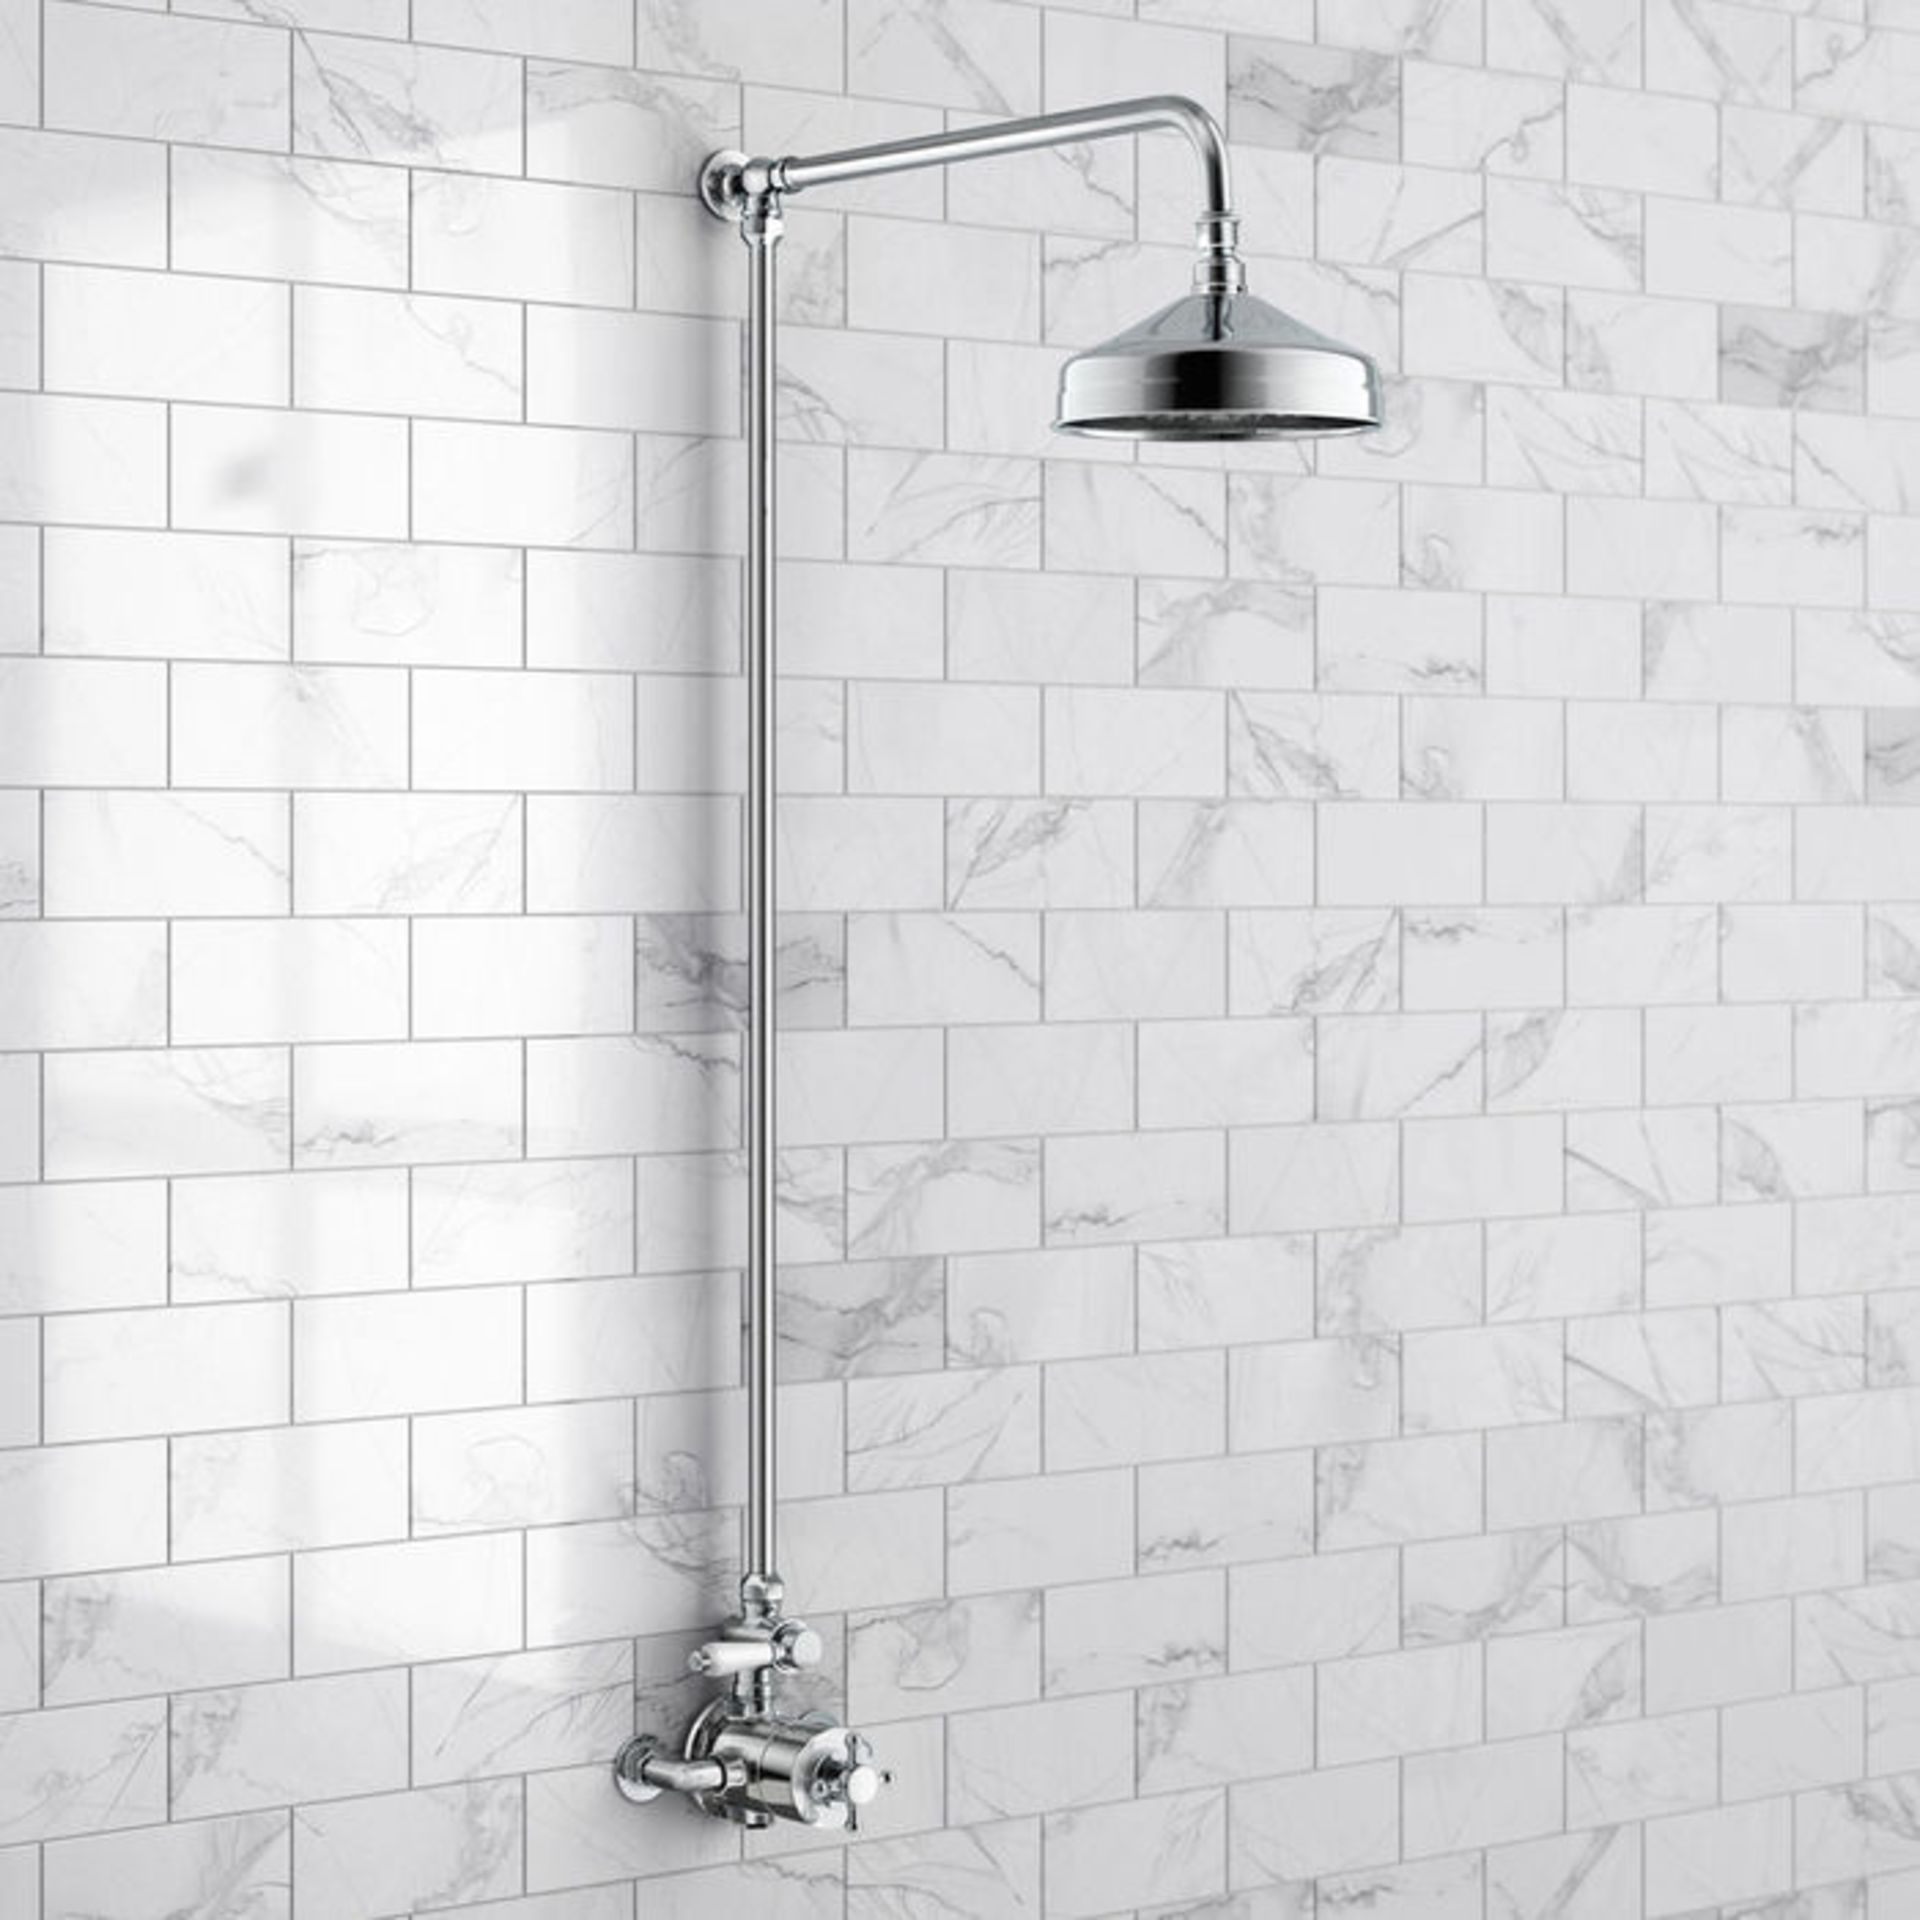 (OS28) Traditional Exposed Thermostatic Shower Kit & Medium Head. Traditional exposed valve - Image 3 of 3